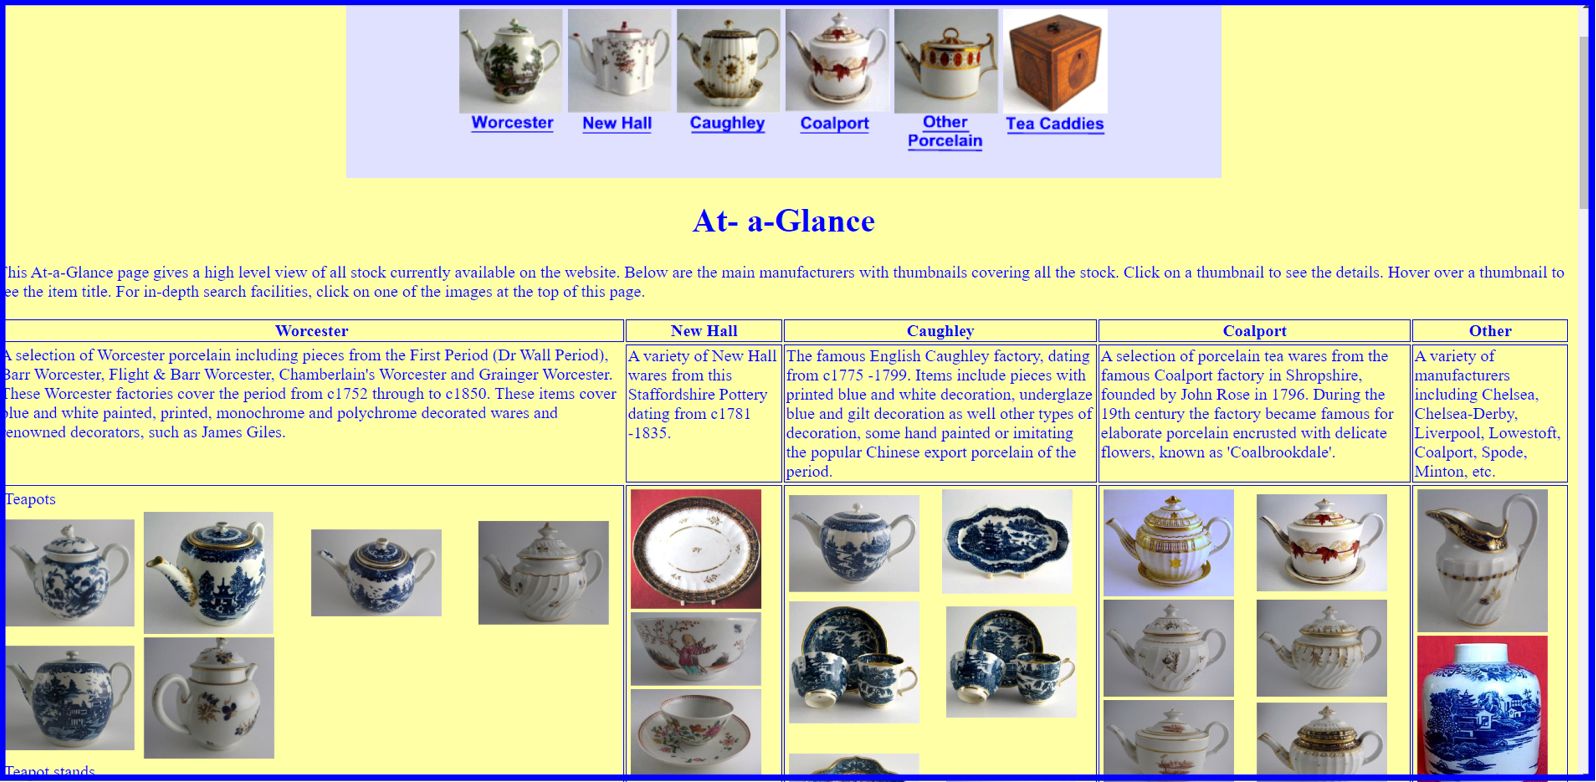 At a glance view of www.teaantiques.com website